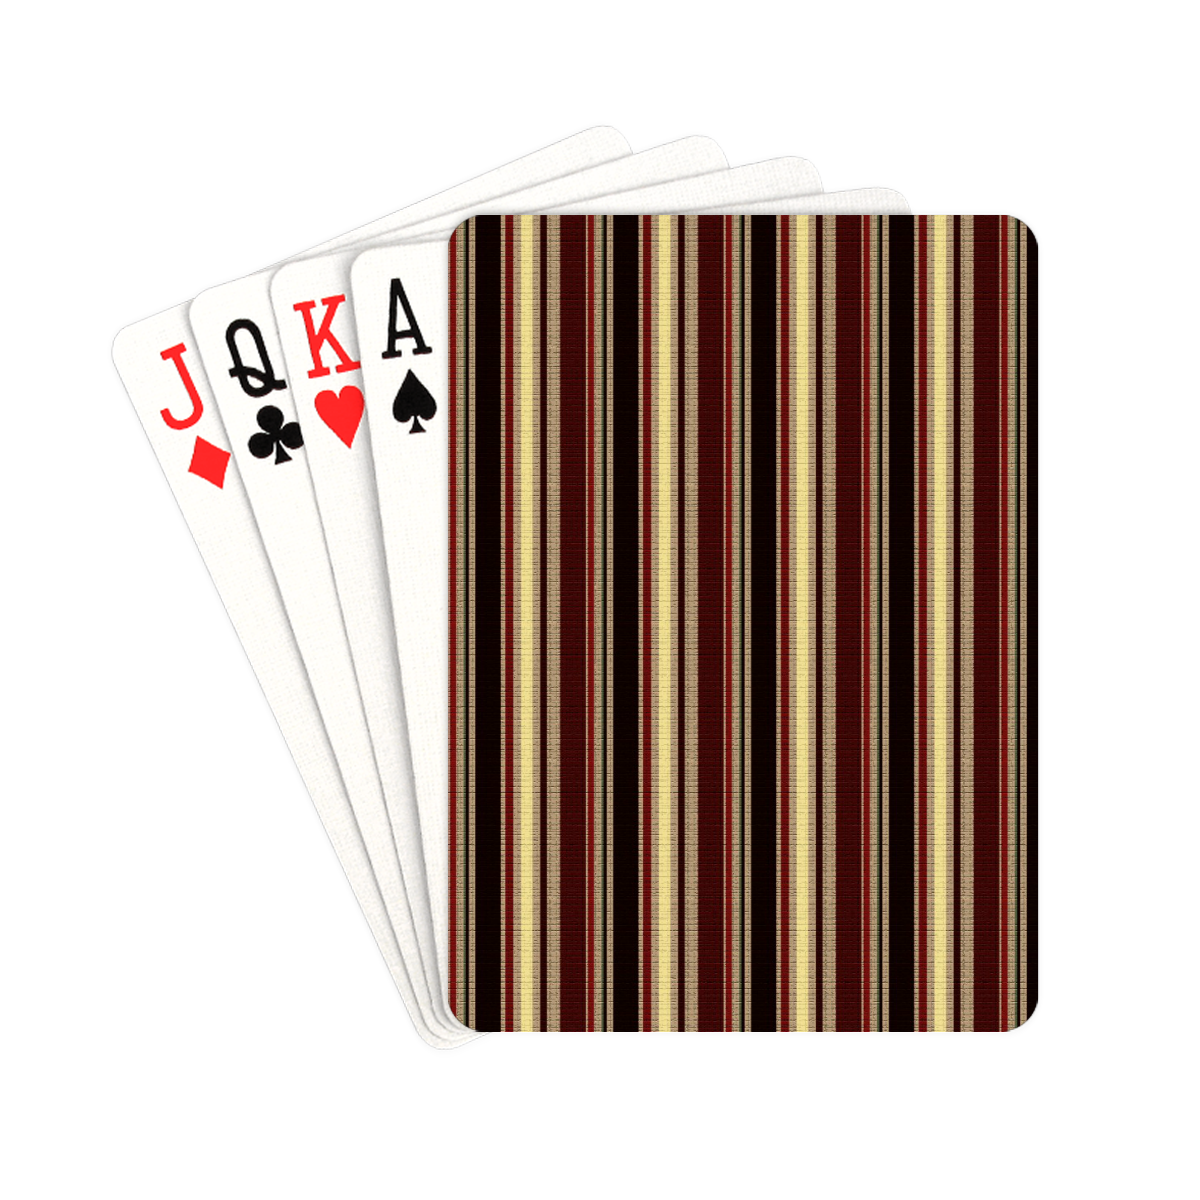 Dark textured stripes Playing Cards 2.5"x3.5"